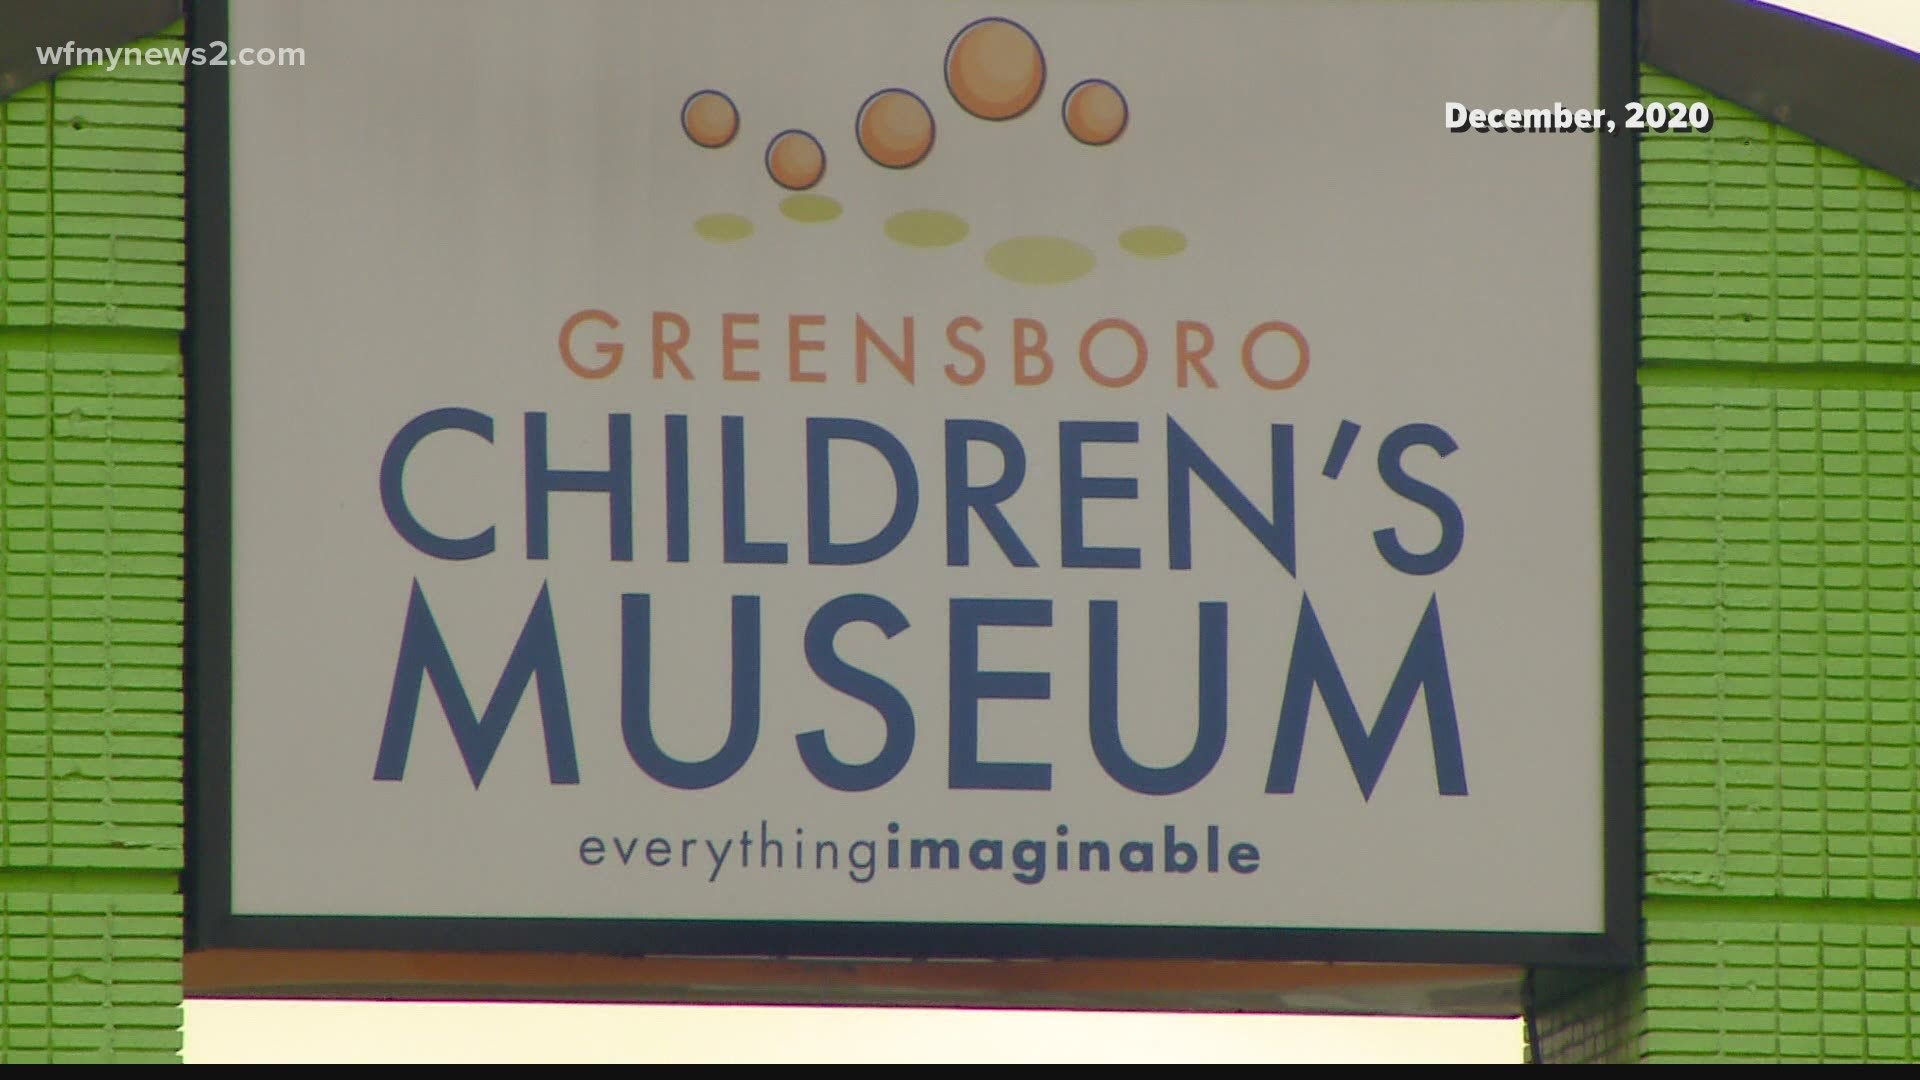 The Greensboro Children's Museum will reopen to the public soon, with new restrictions in place.